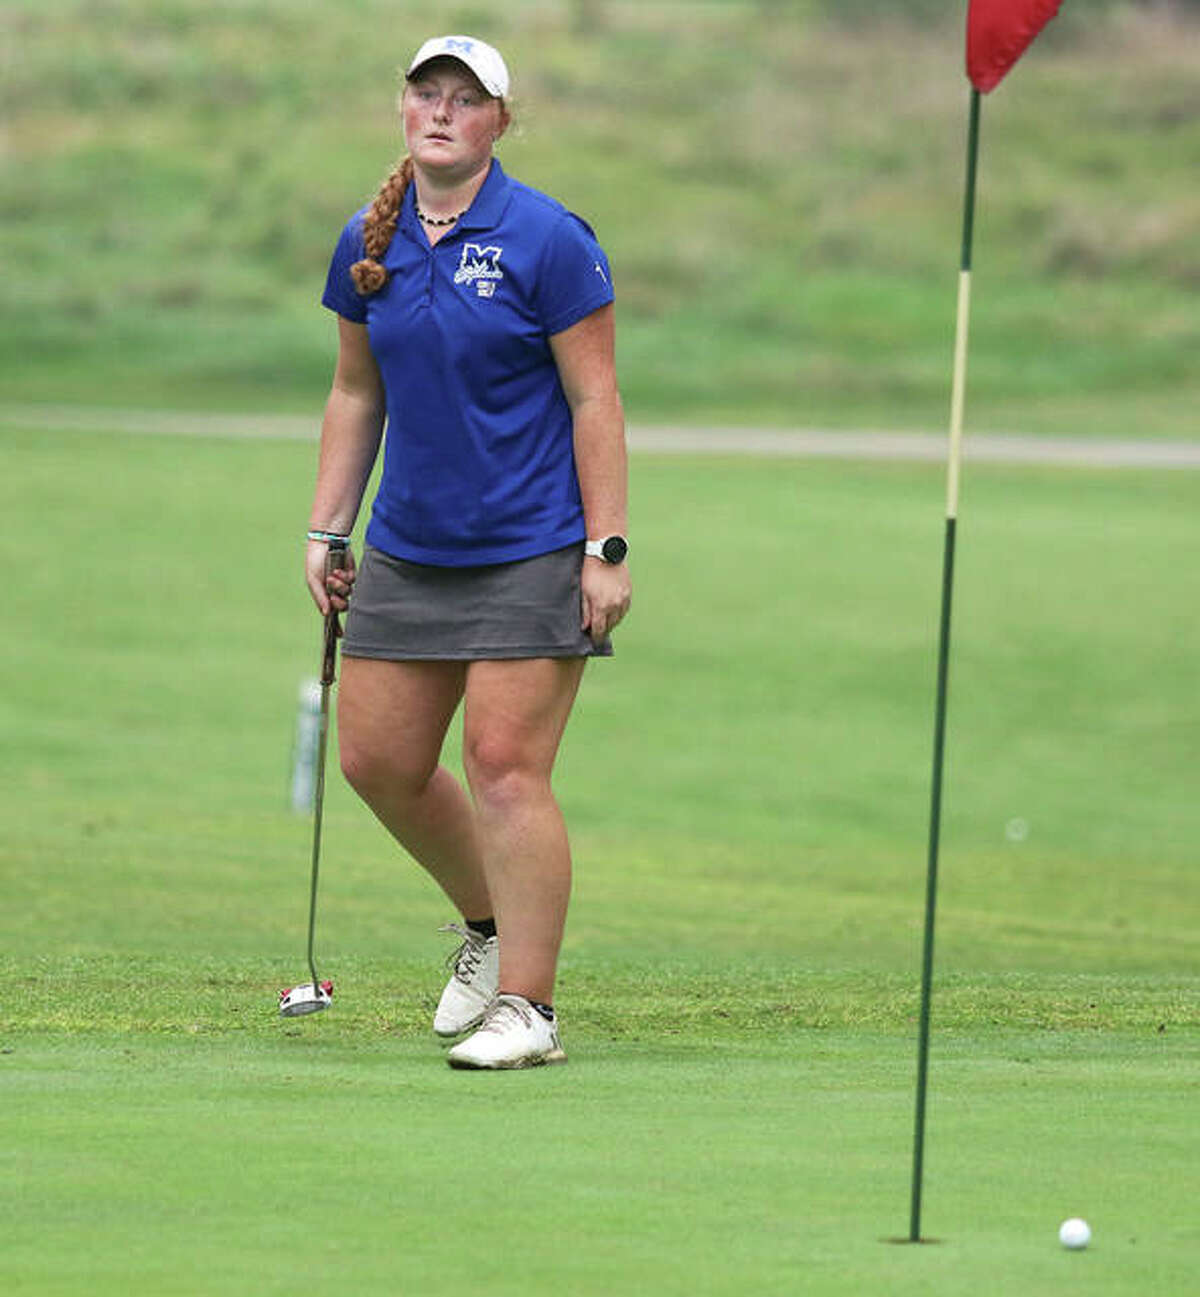 Marquette’s Gracie Piar reacts after missing a putt on the 18th hole Saturday in the Alton Classic at Rolling Hills golf course in Godfrey. Piar finished fourth at 76.